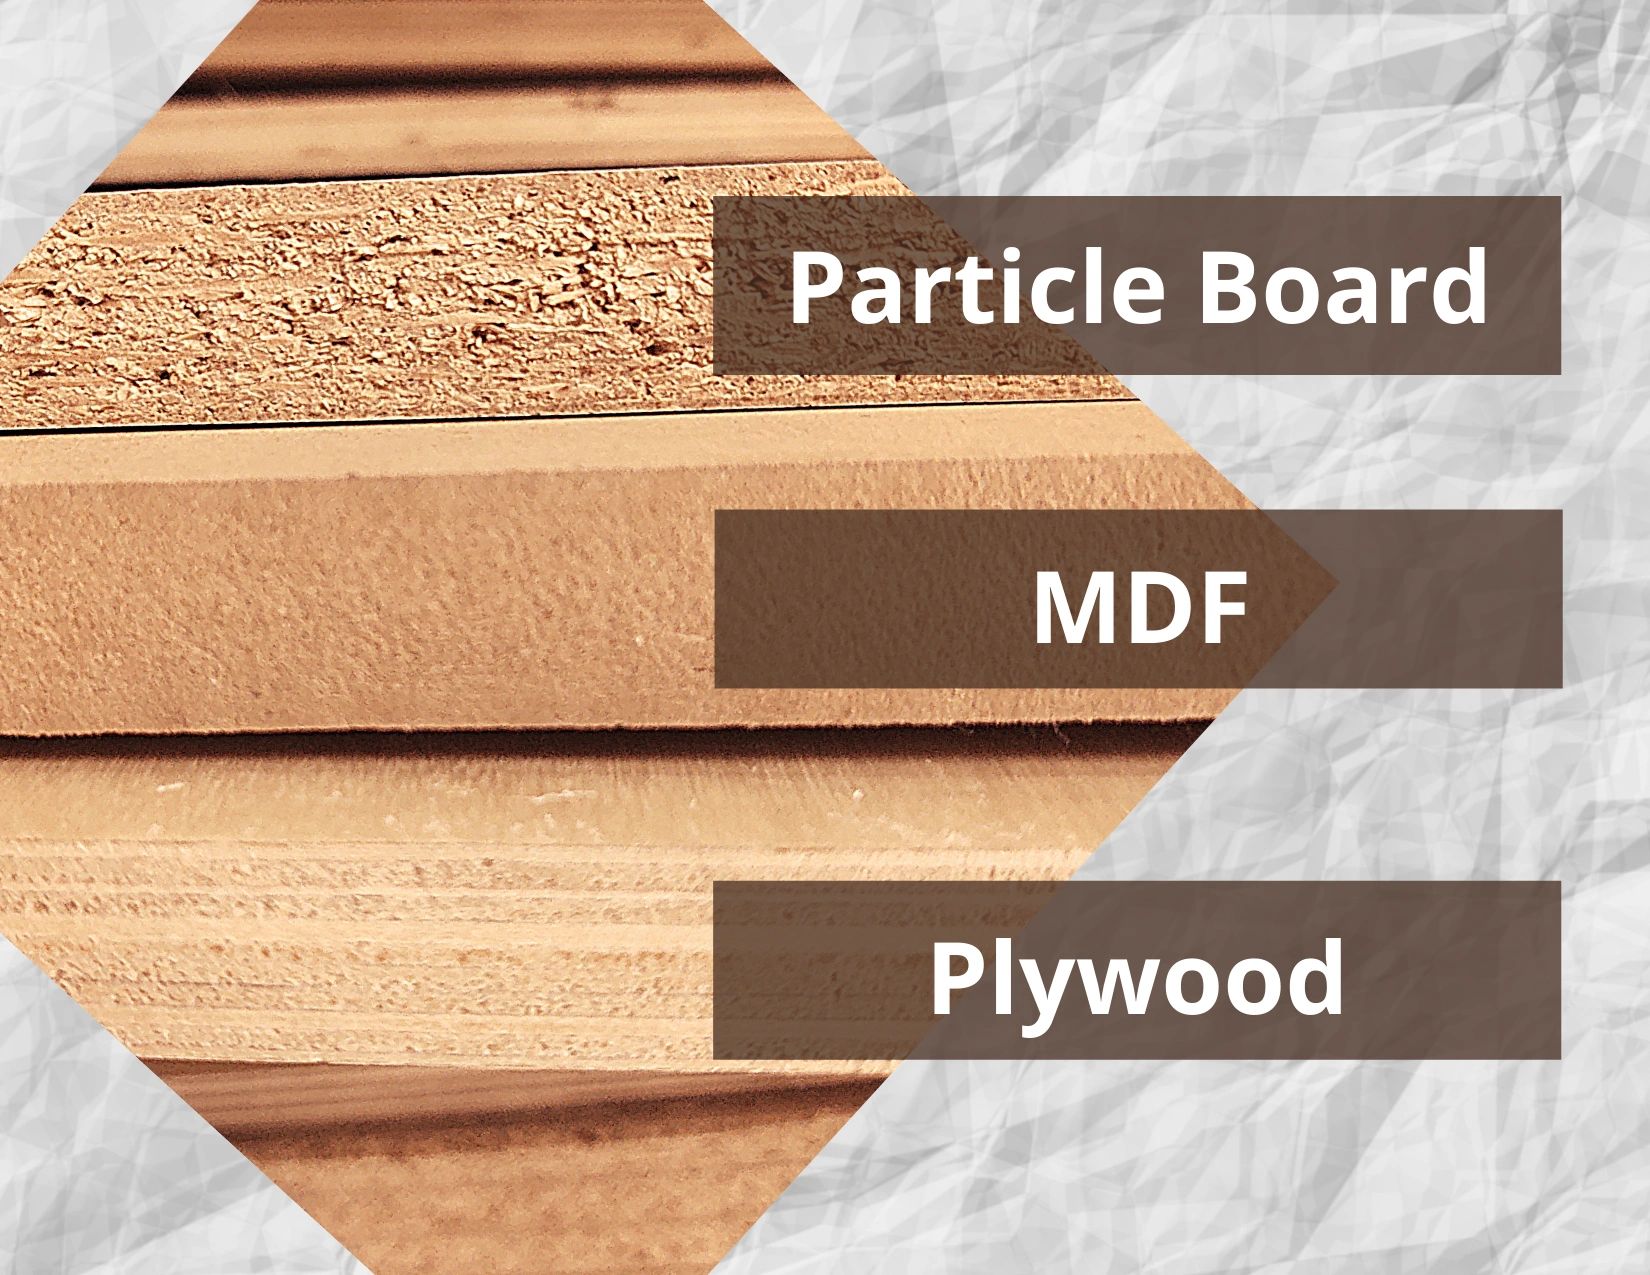 Particle Board vs Plywood in Kitchen Cabinetry